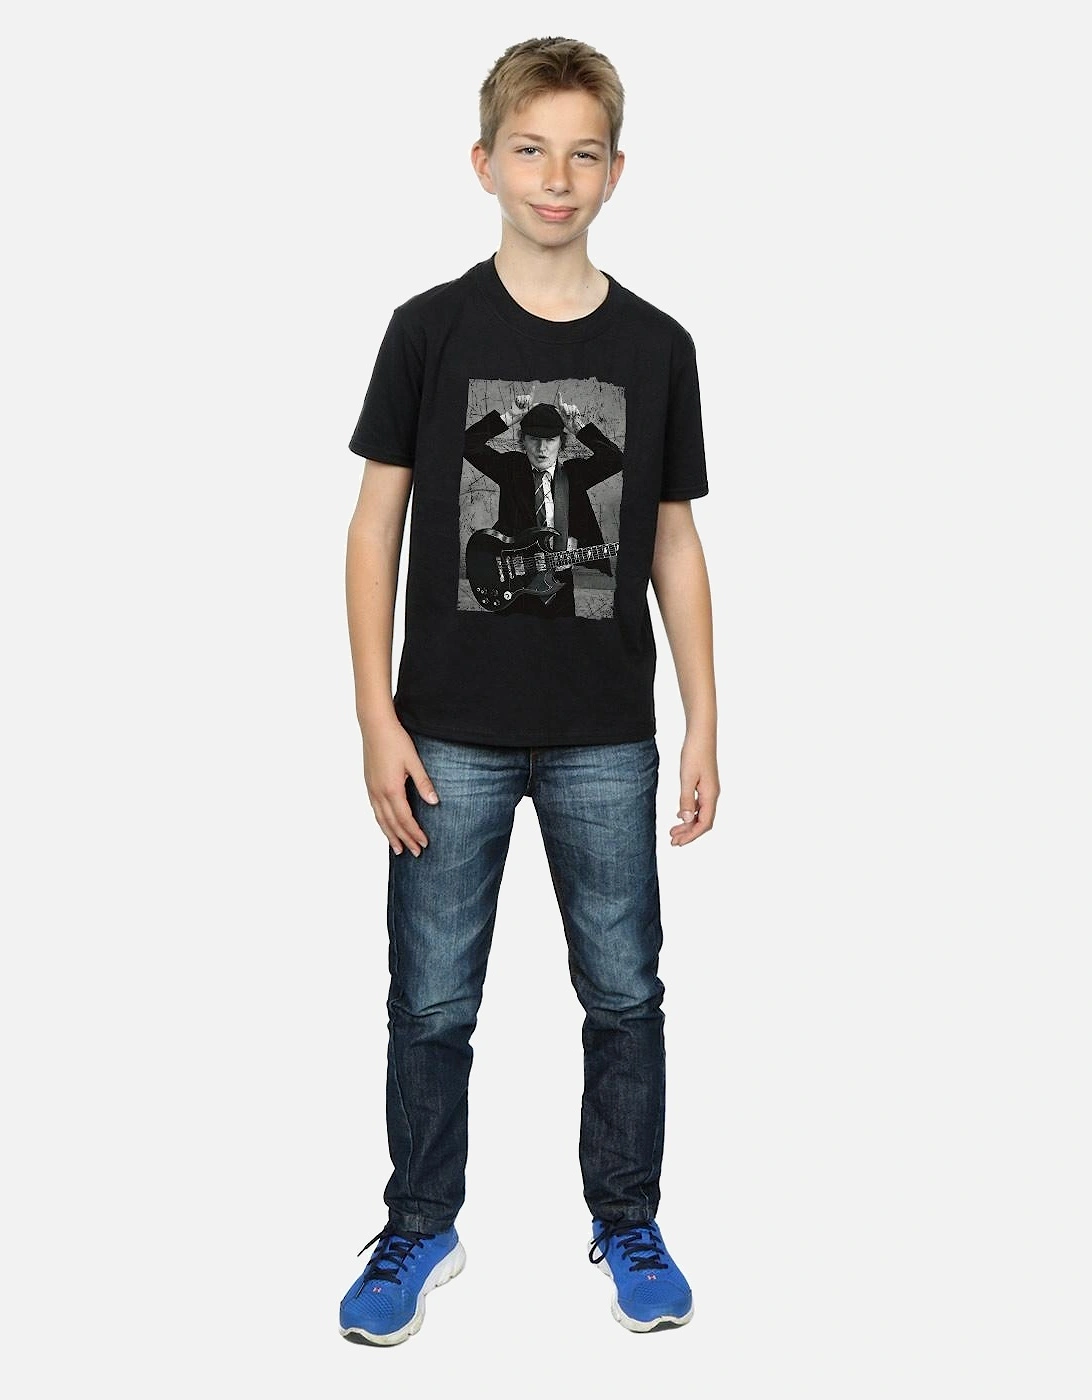 Boys Angus Young Distressed Photo T-Shirt, 8 of 7